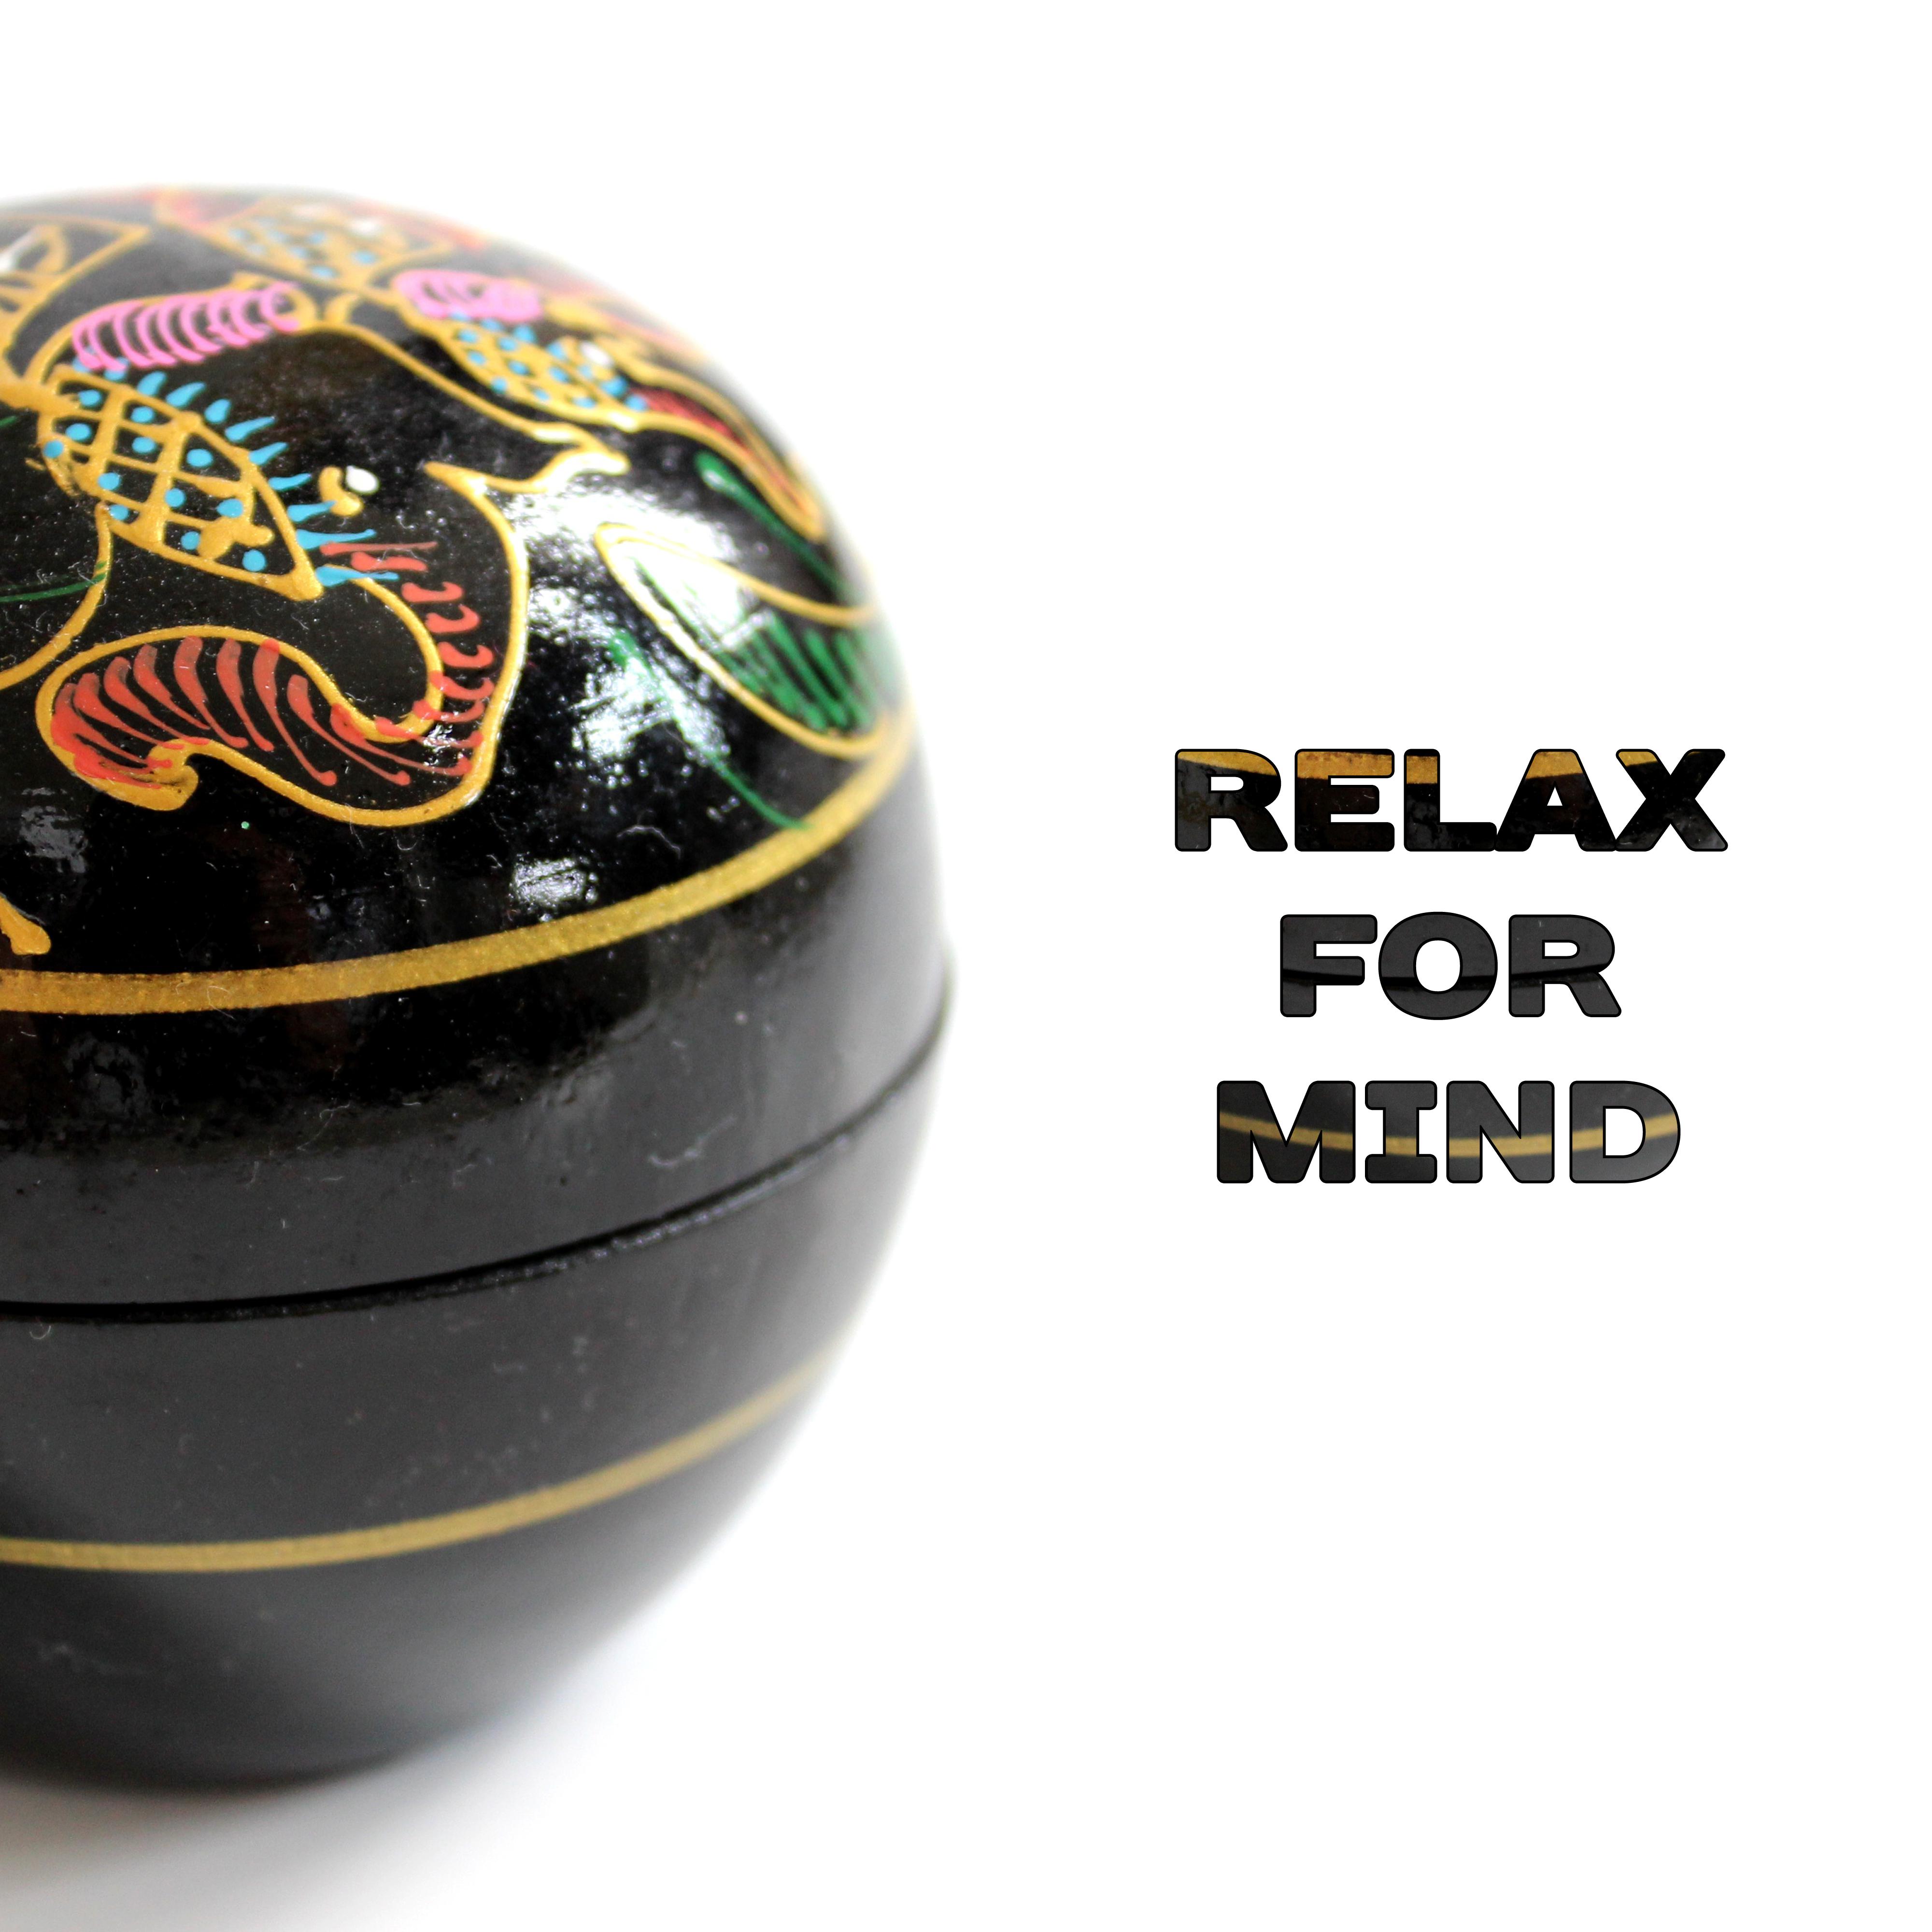 Relax for Mind – Calmness, Zen Music, Therapy Sound, Deep Relief, Stress Free, Music to Calm Down, Pure Relaxation, Positive Energy